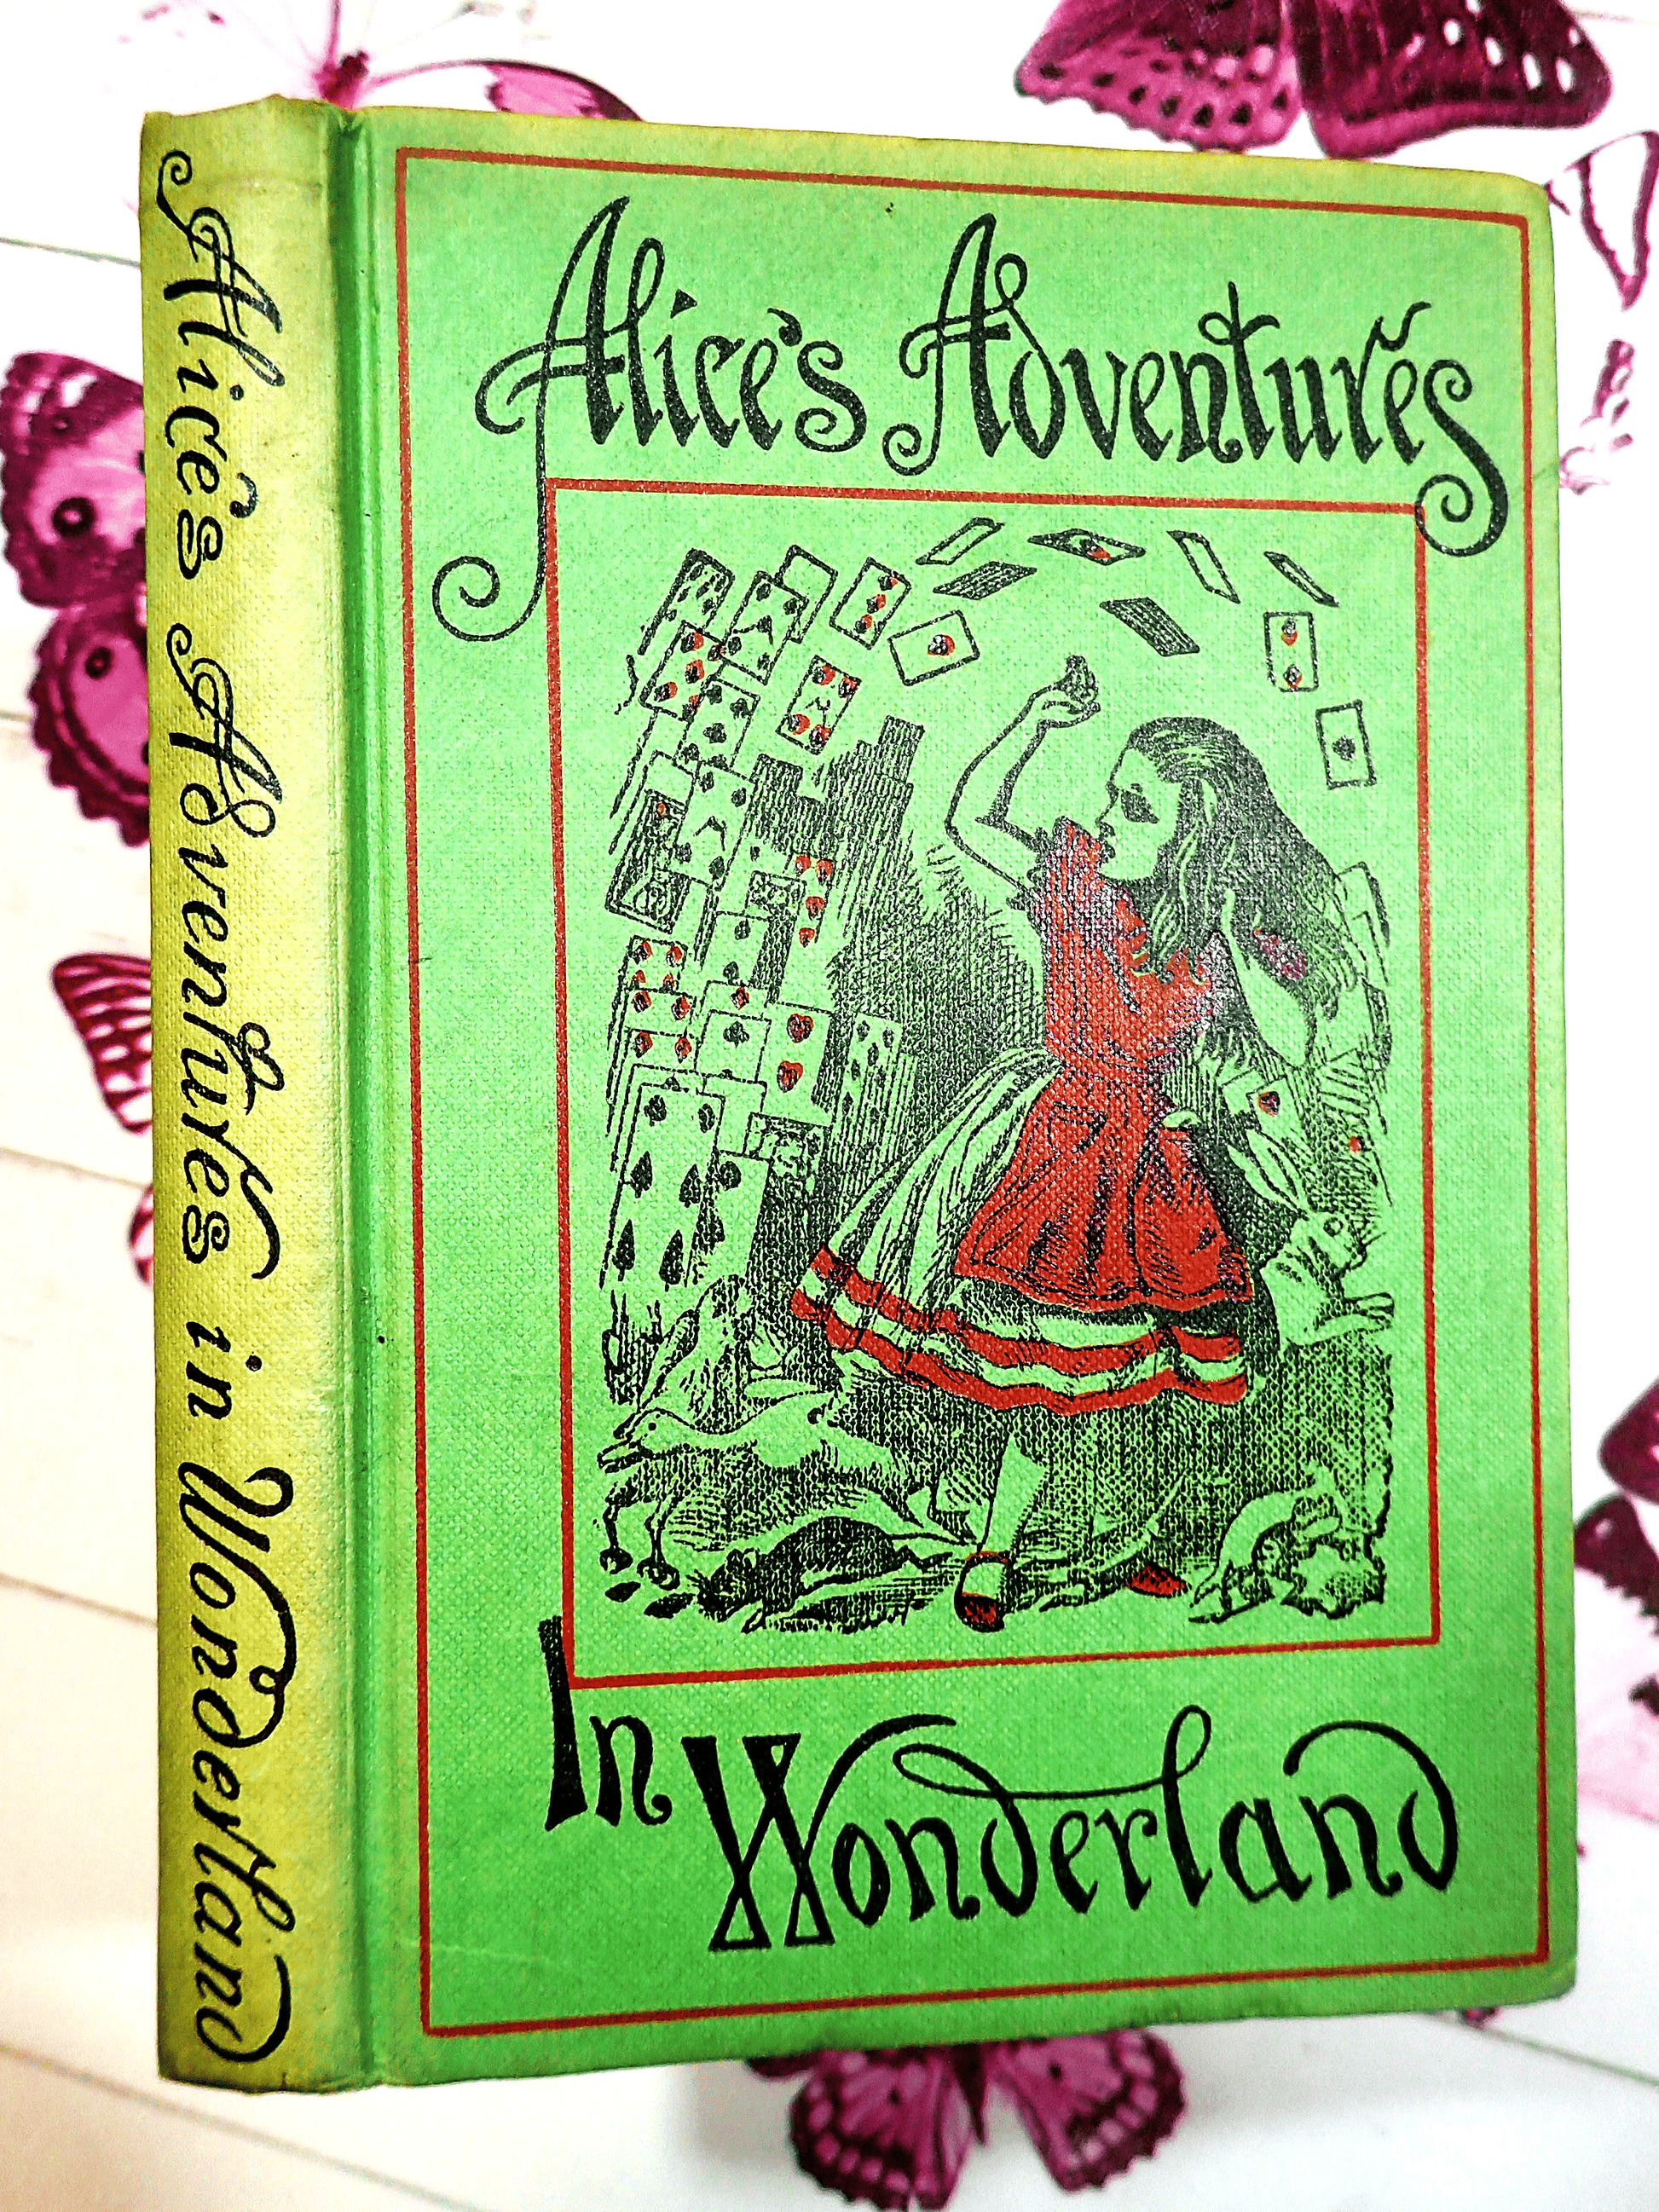 Gifts for fans of Alice in Wonderland - Pan Macmillan